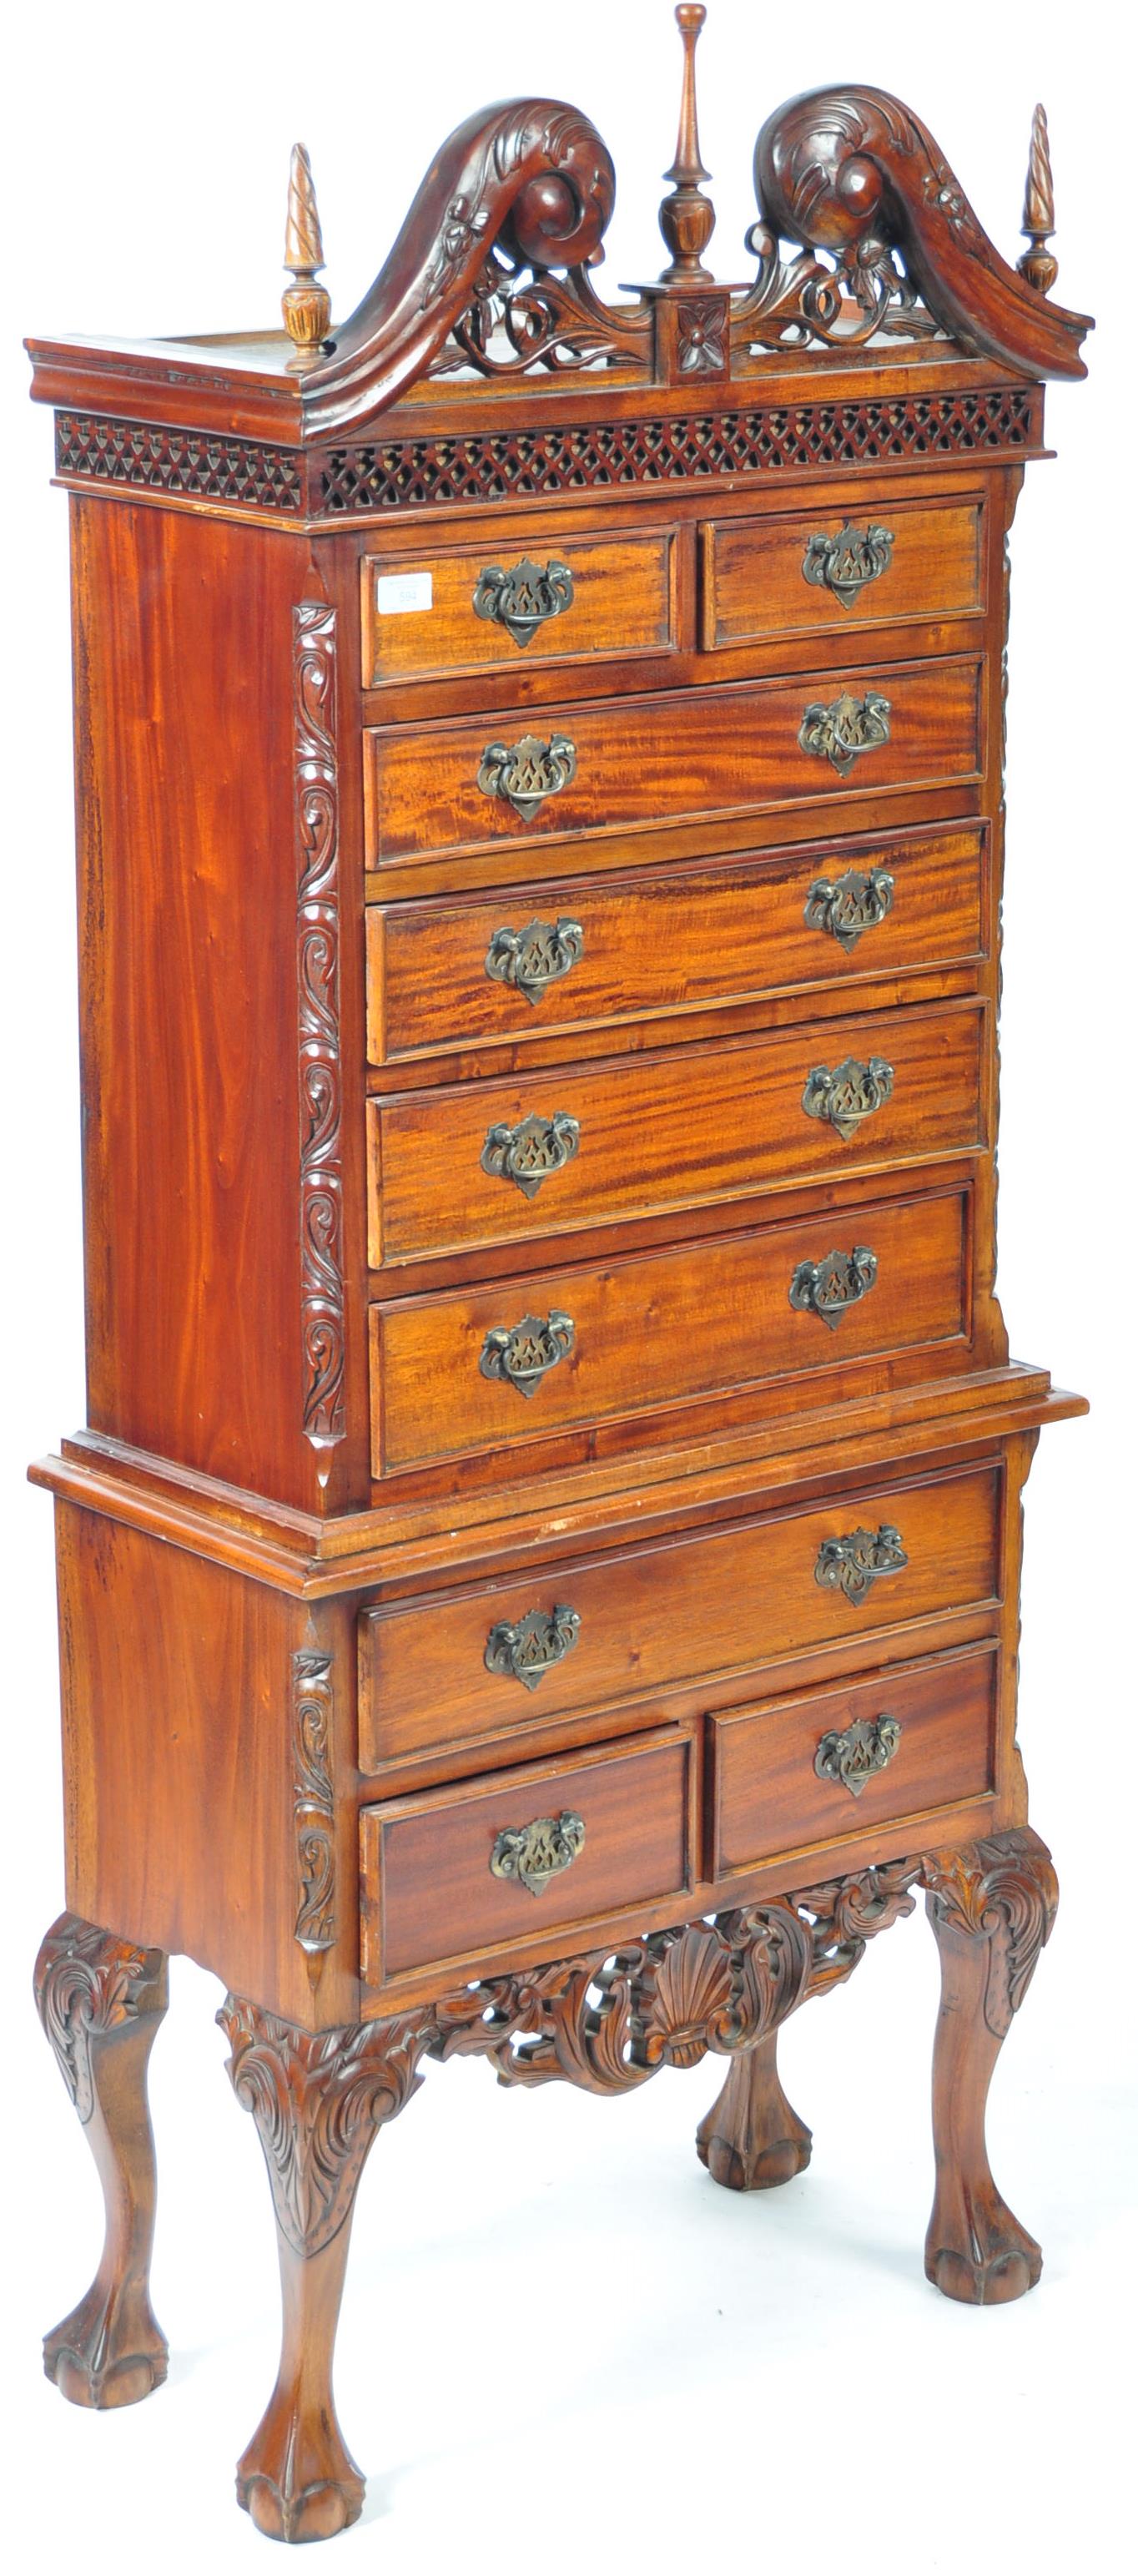 ANTIQUE STYLE MAHOGANY CHEST ON CHEST OF DRAWERS - Image 2 of 12